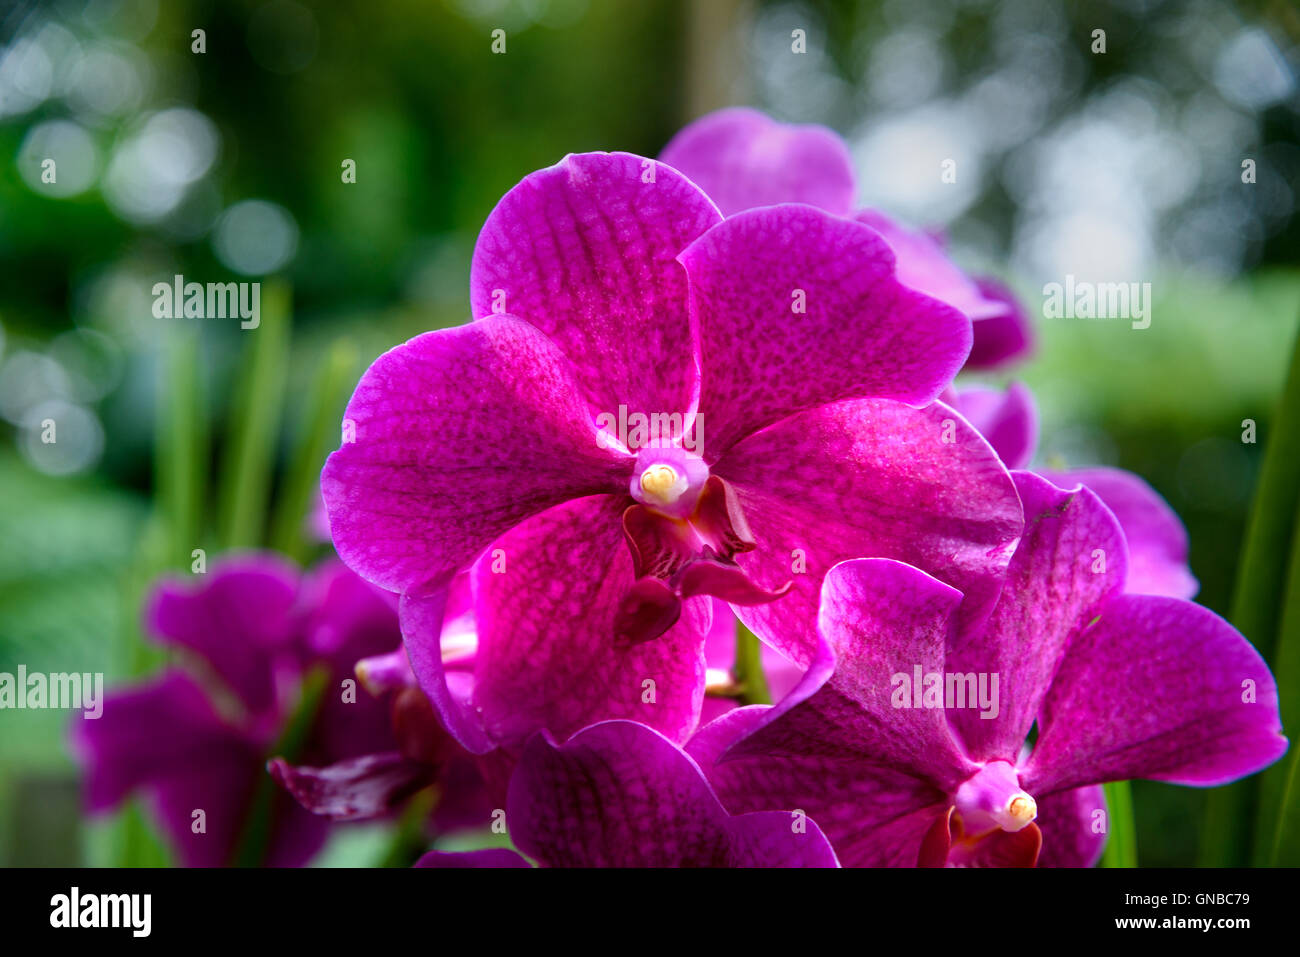 Vanda Penang Currency orchids flower in the garden. Stock Photo